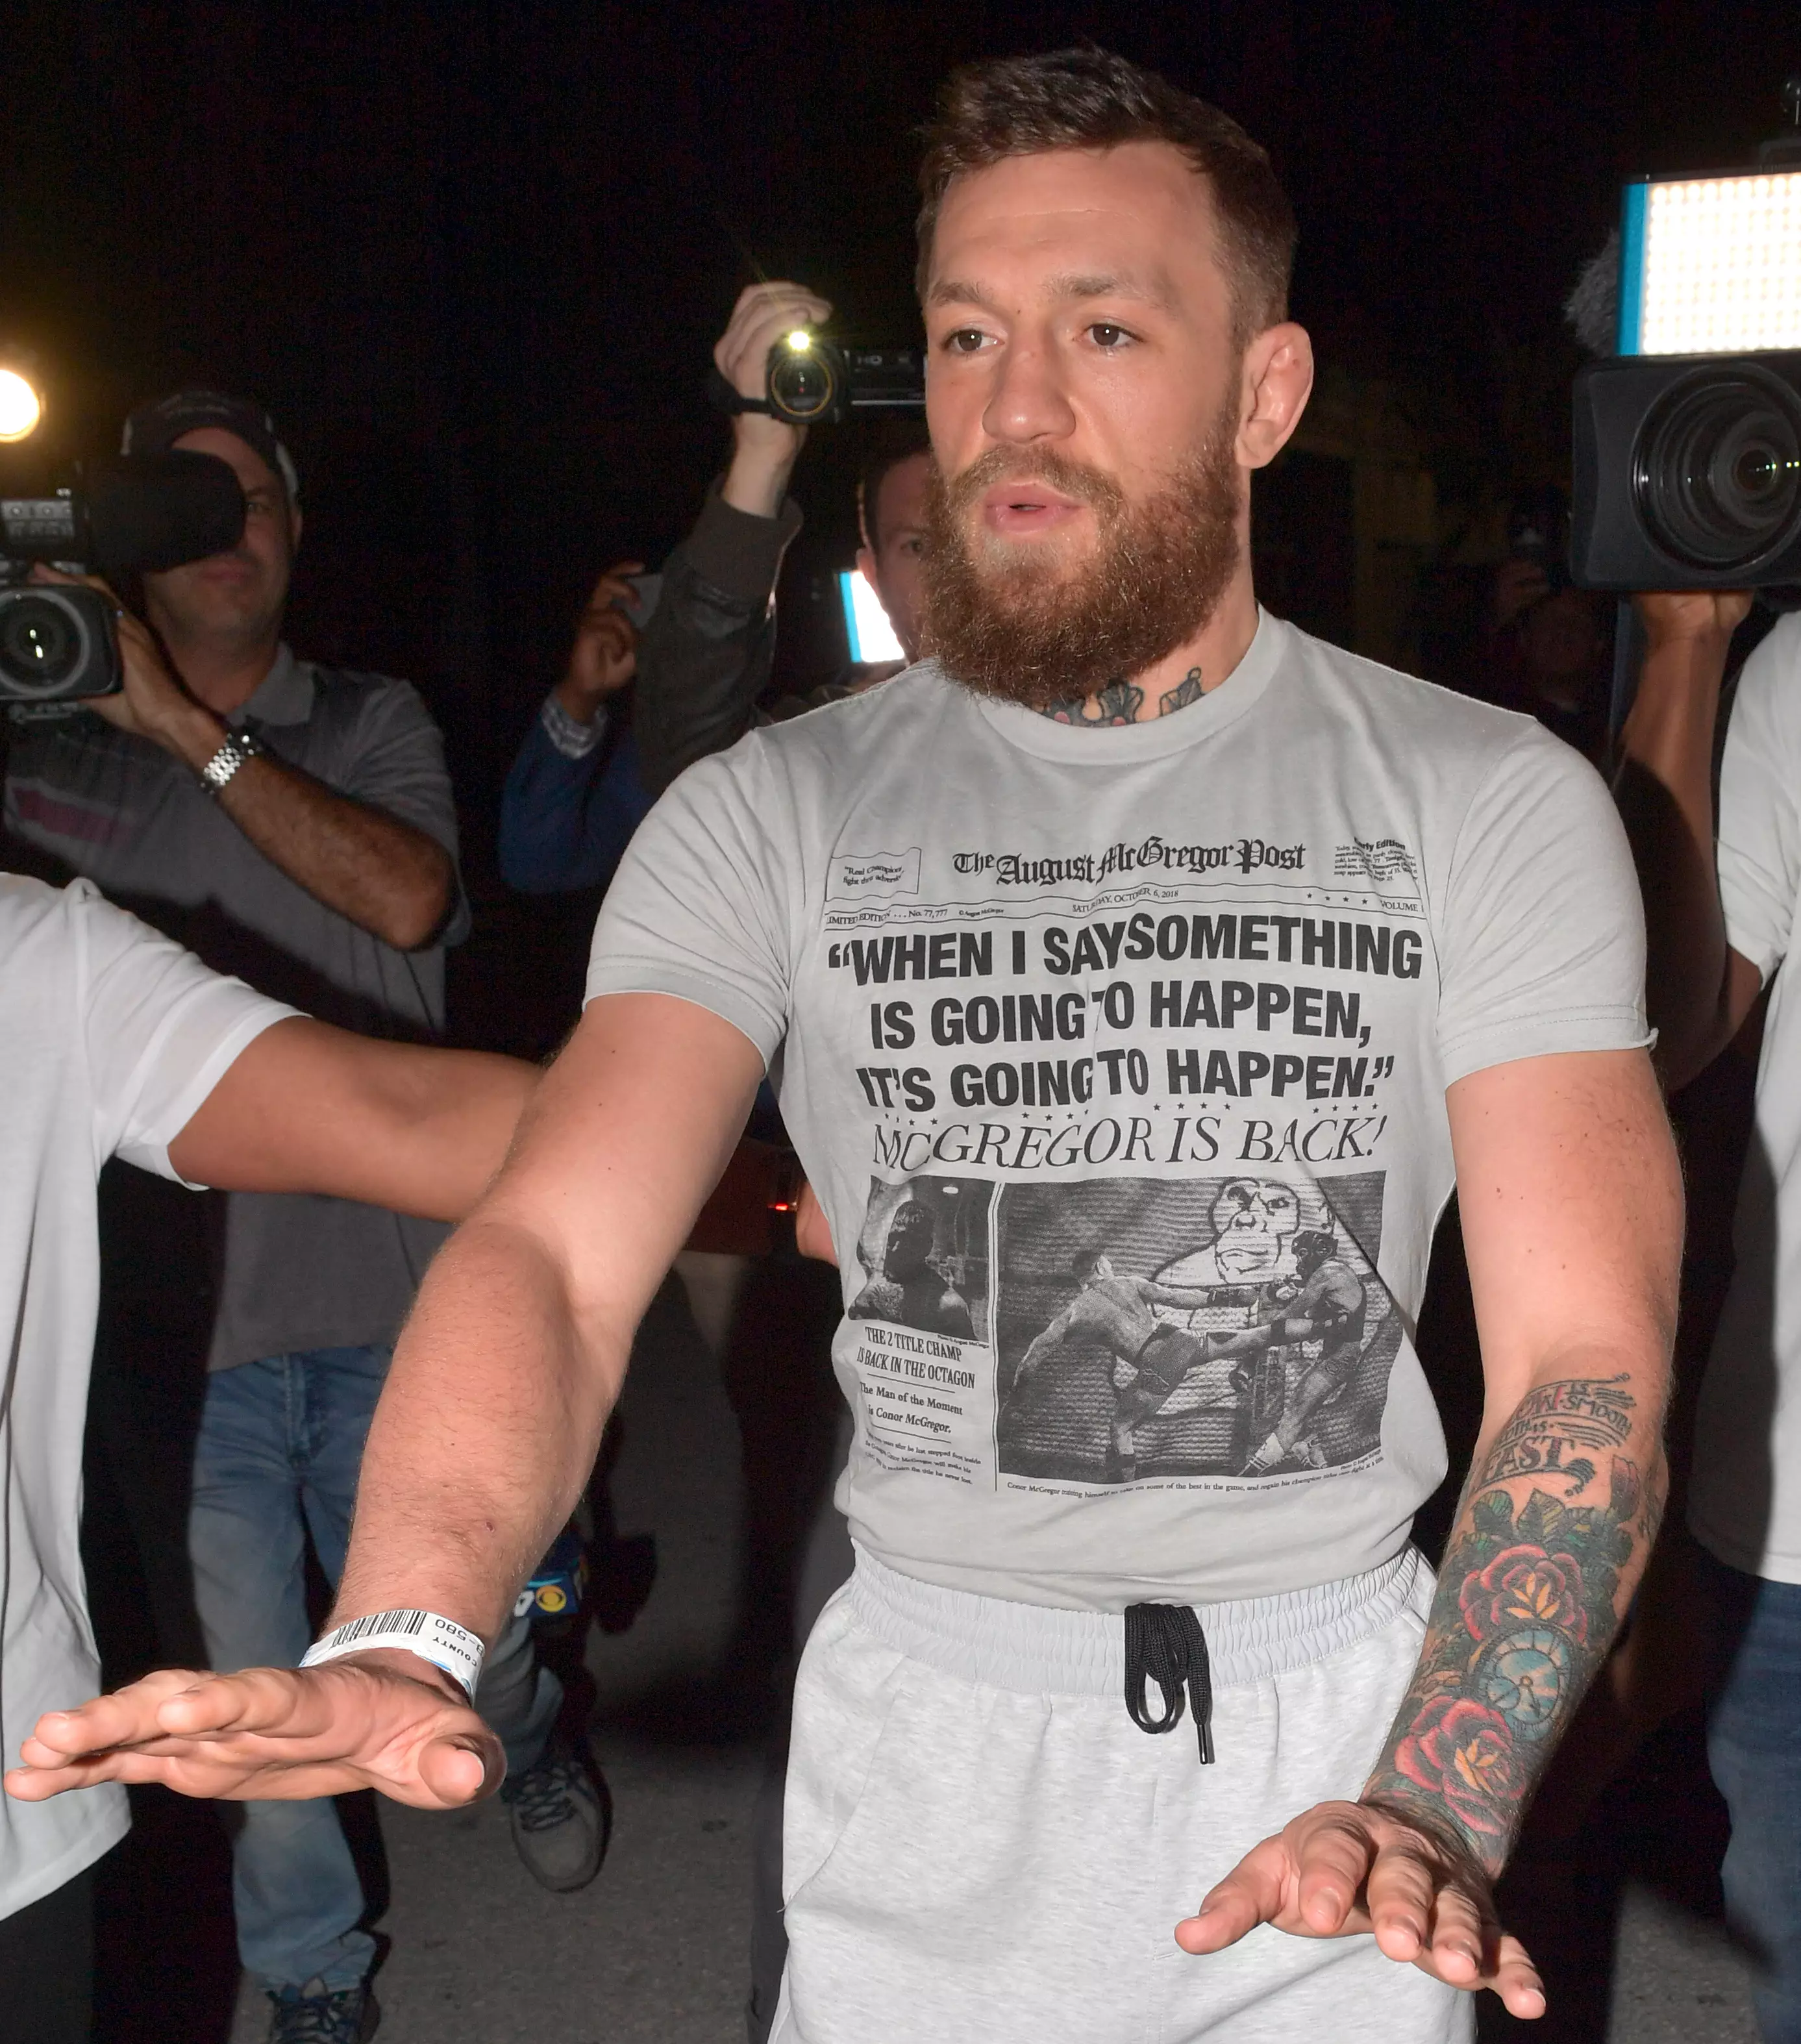 The man who was allegedly punched by McGregor described the fighter as a 'bully'.